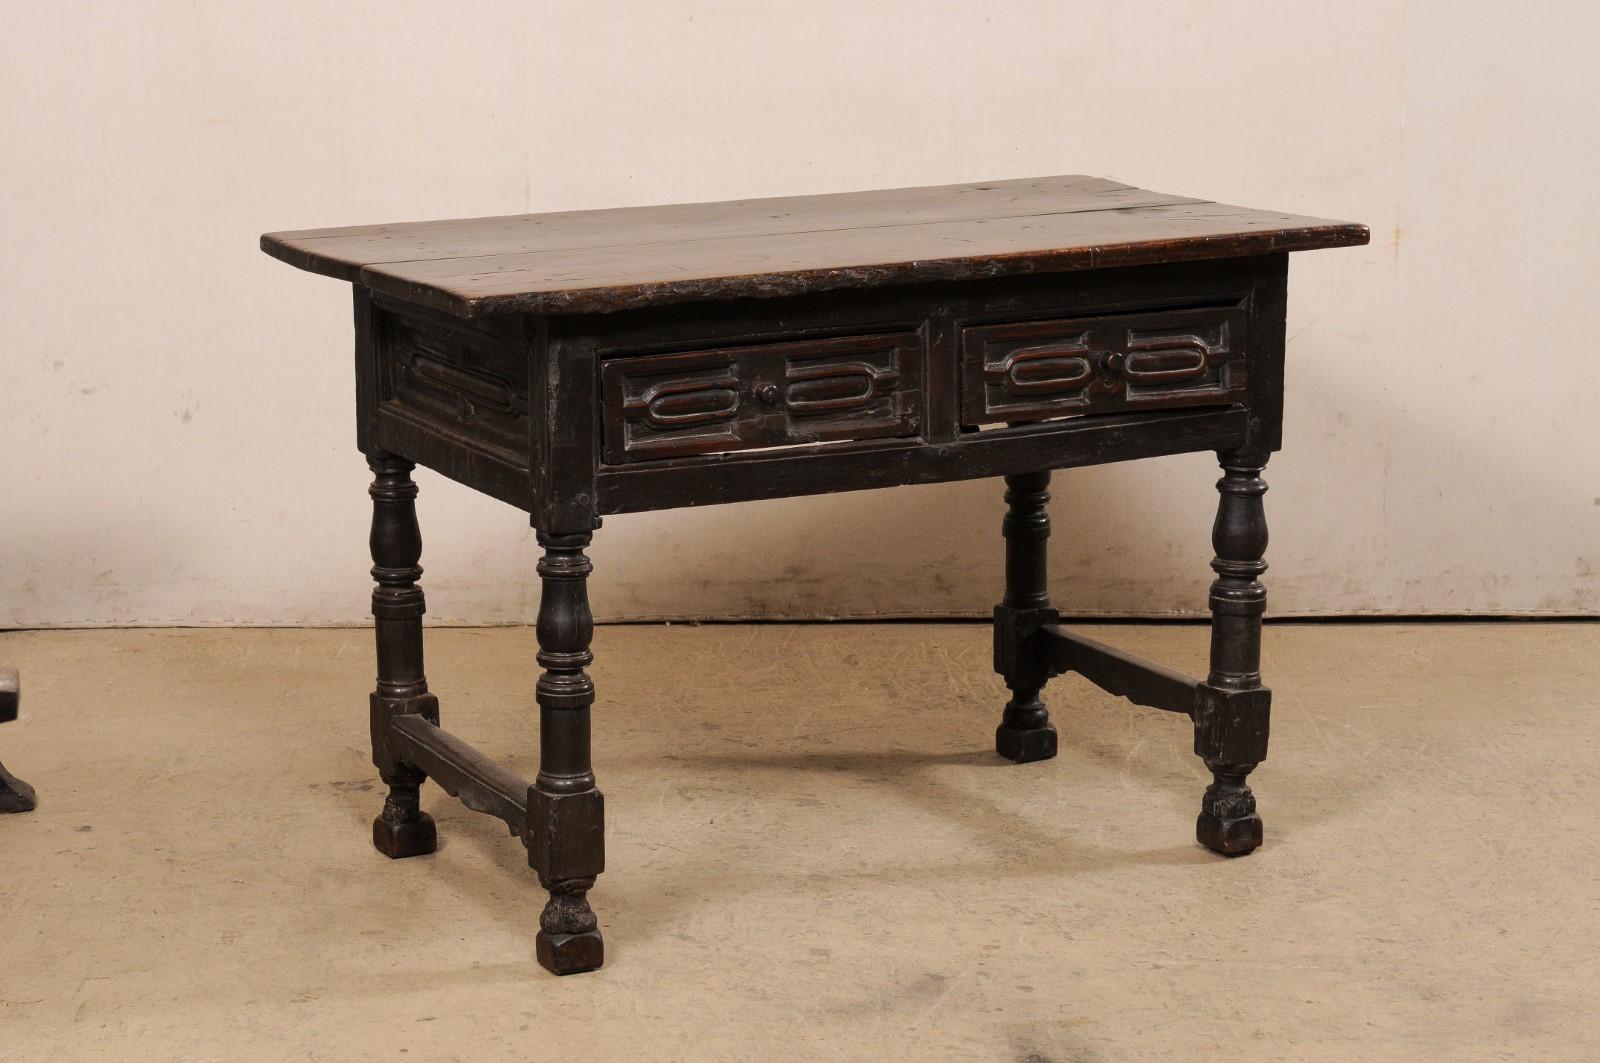 An Italian carved walnut wood occasional table with drawers, from the early 18th century (possibly 17th century). This antique table from Italy, created from rich walnut wood, has a rectangular-shaped top, which overhangs the carved apron below